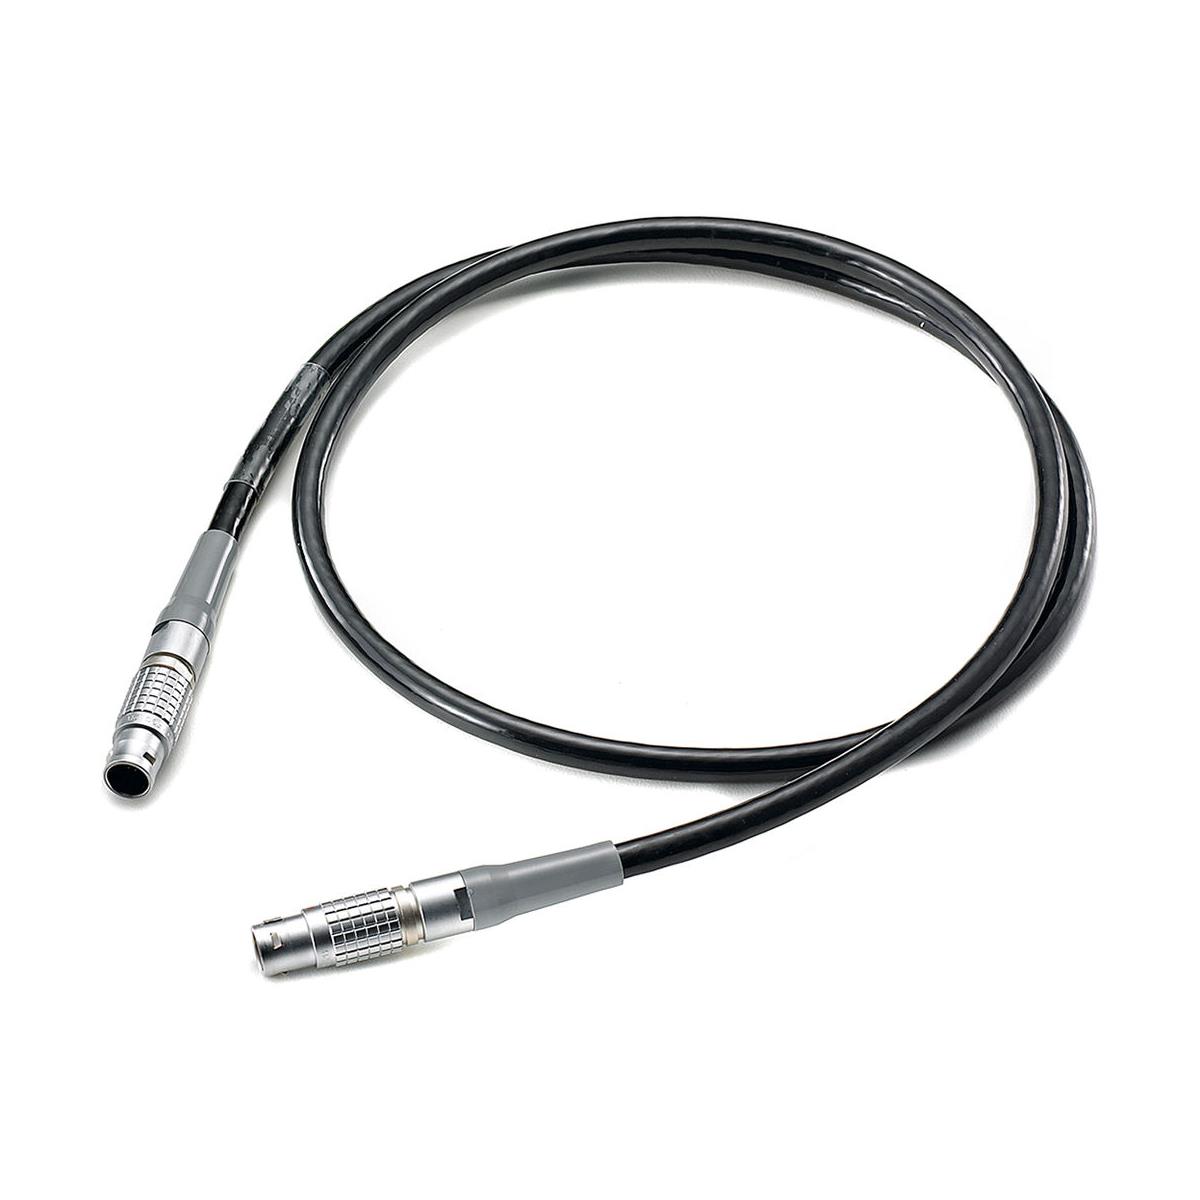 Image of Anton Bauer Low Cost Charge Cable for CINE Series Batteries/Chargers